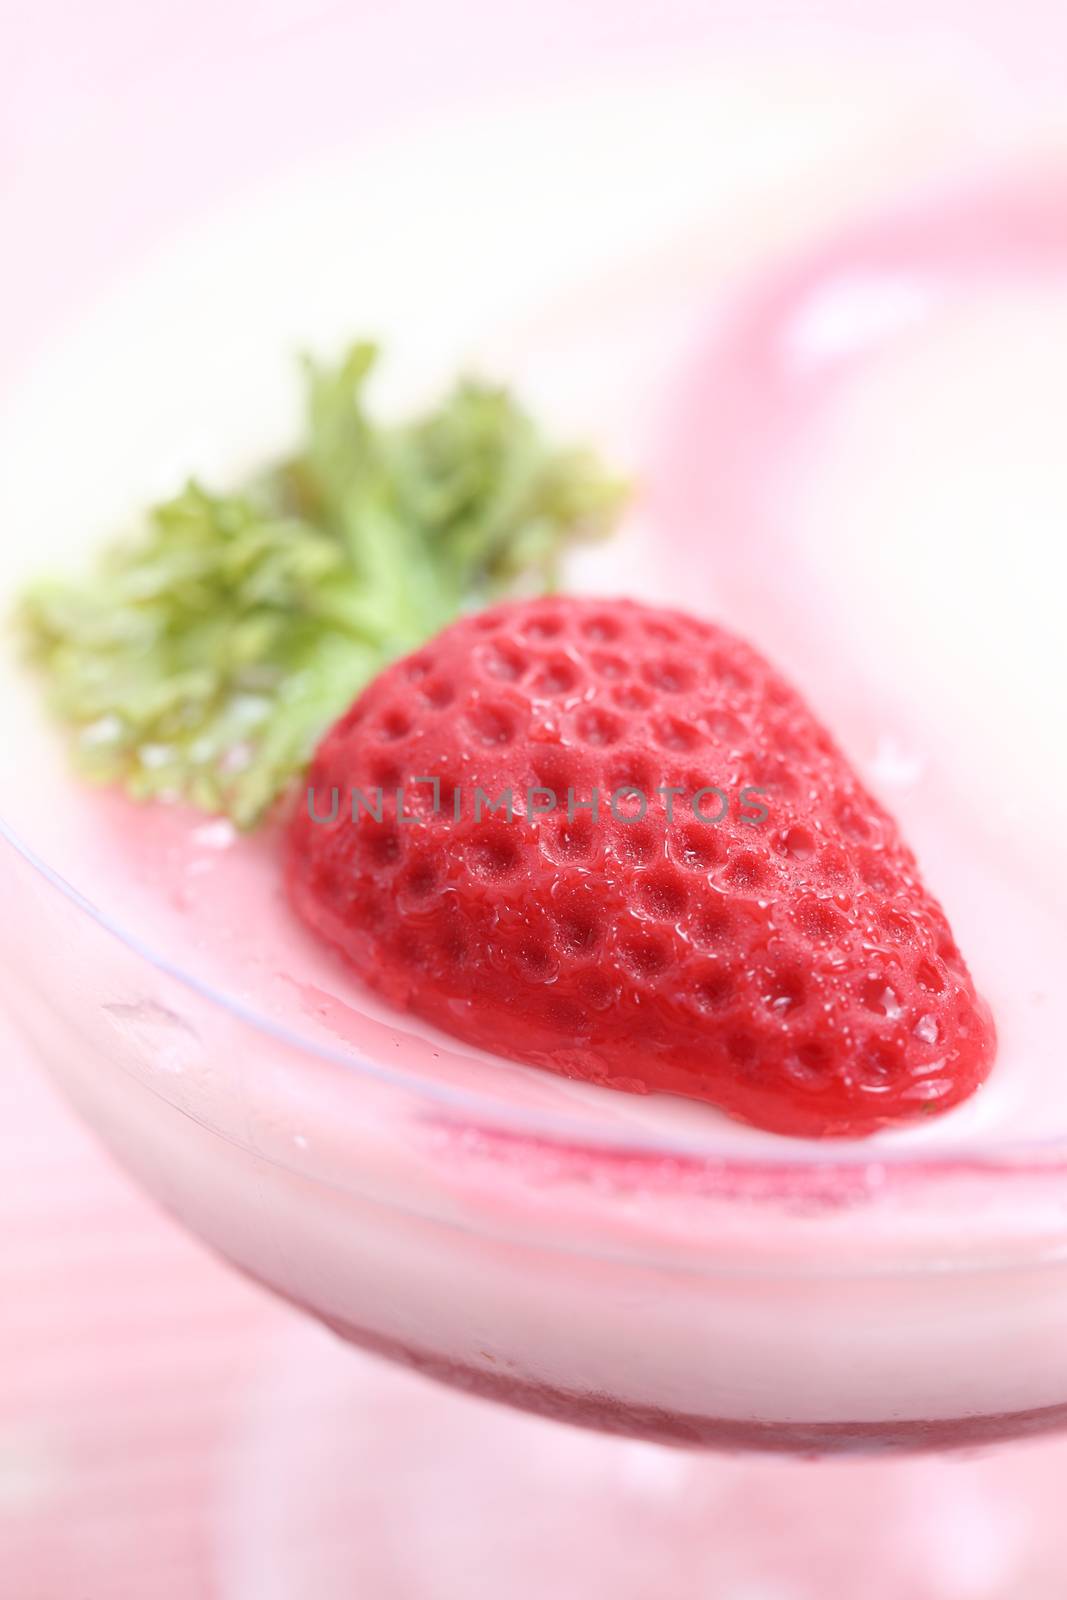 Strawberry pudding in close up